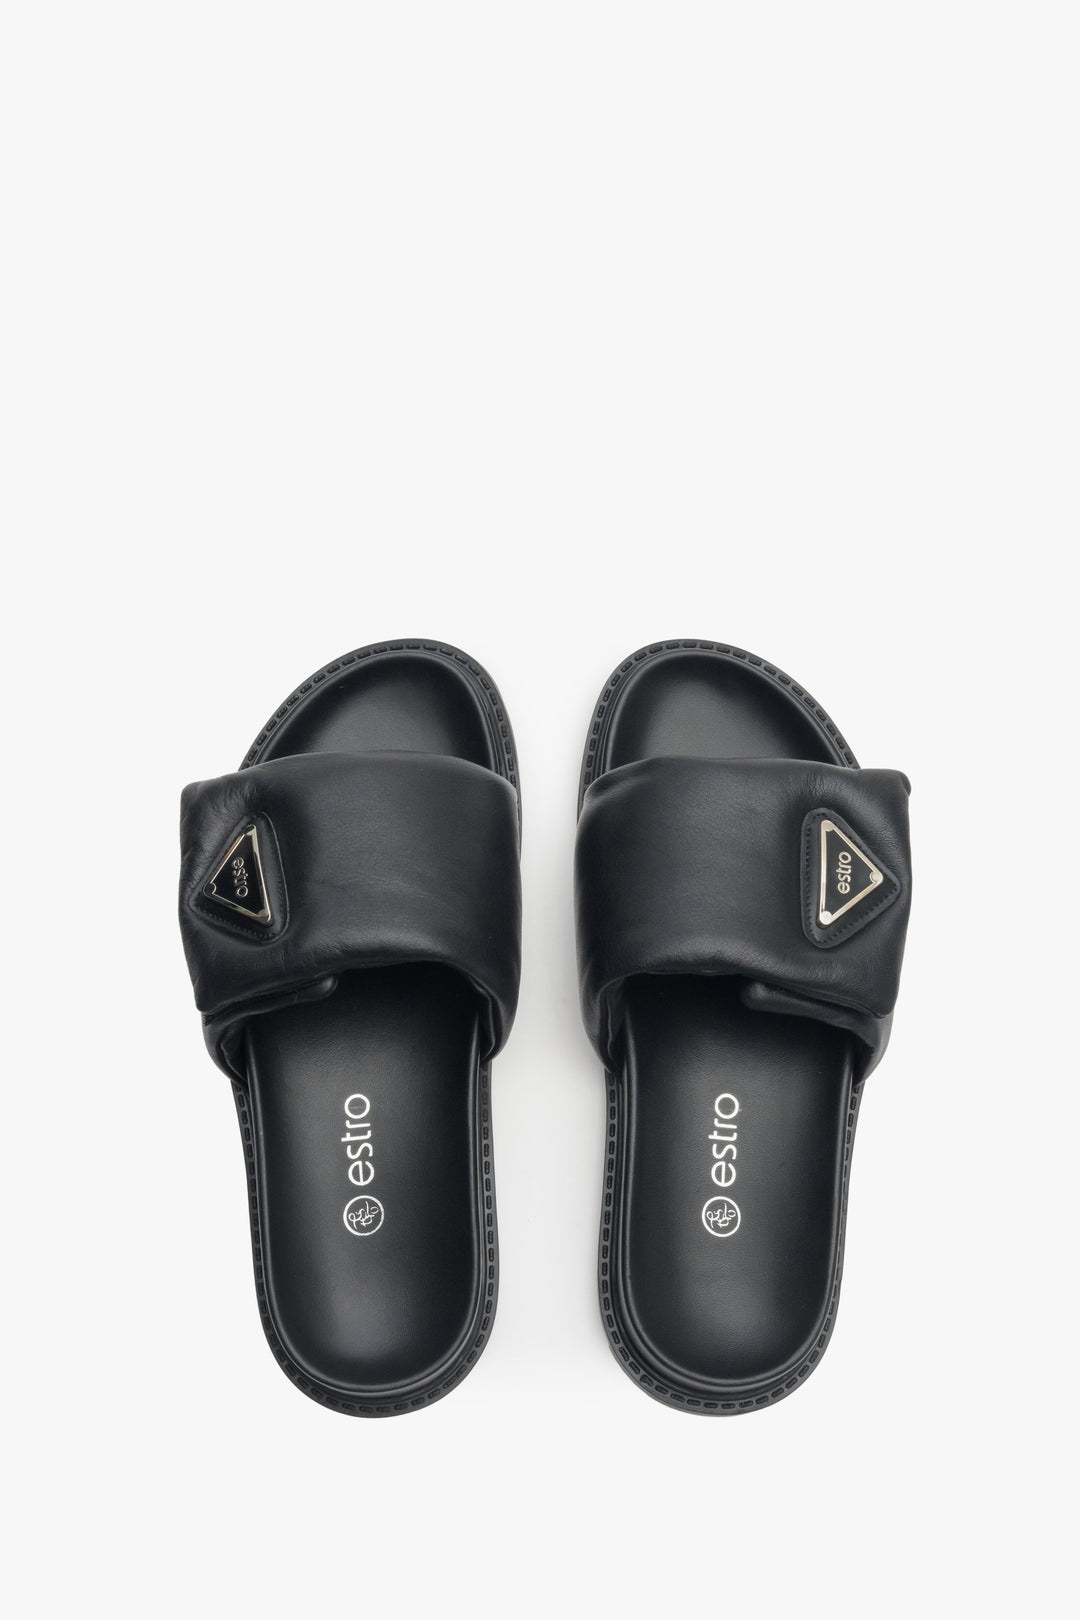 Elegant and comfortable black women's slides made of natural, Italian leather designed by Estro.